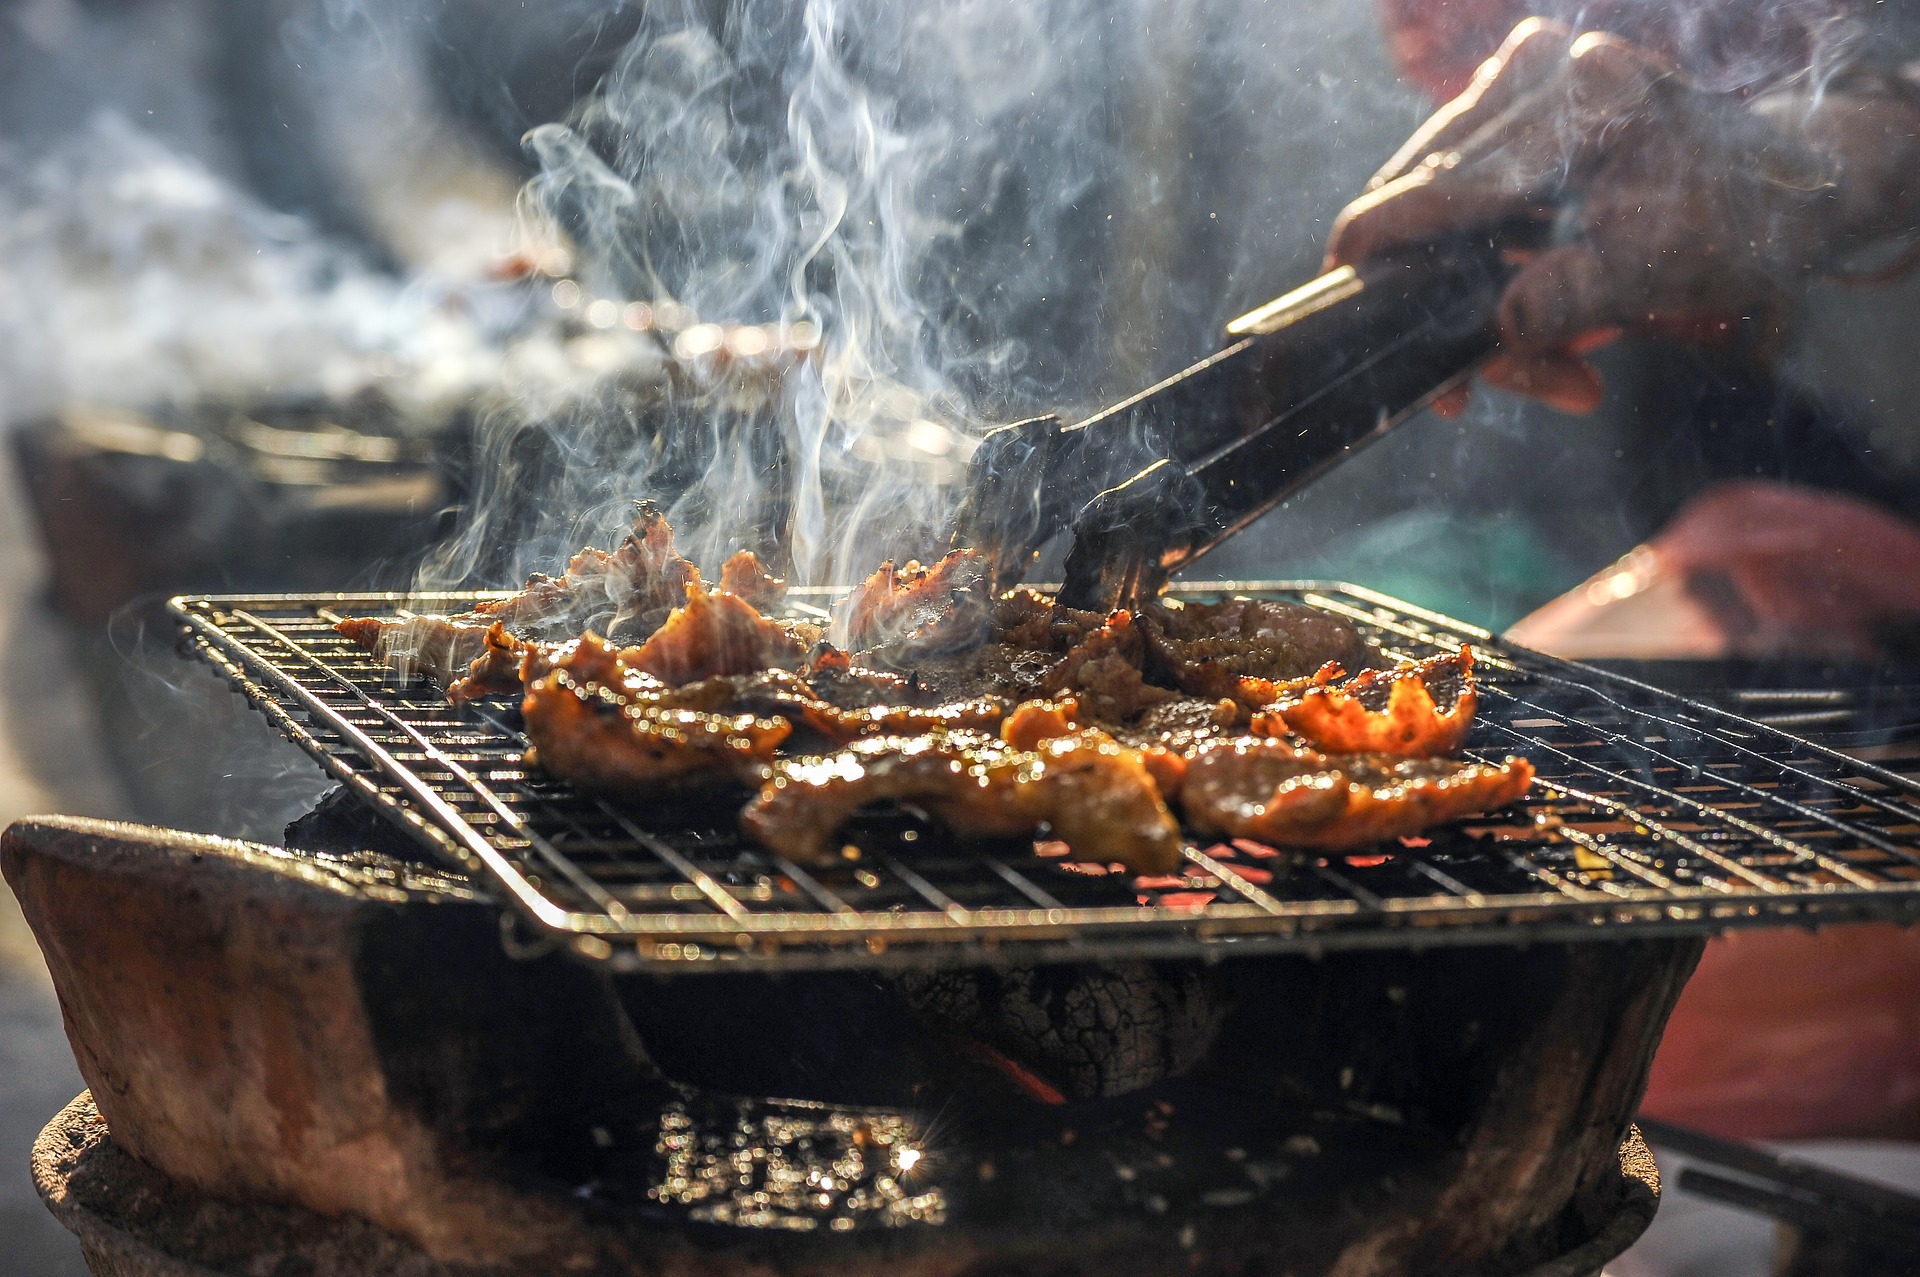 Could Aussie barbeque go up in smoke? –